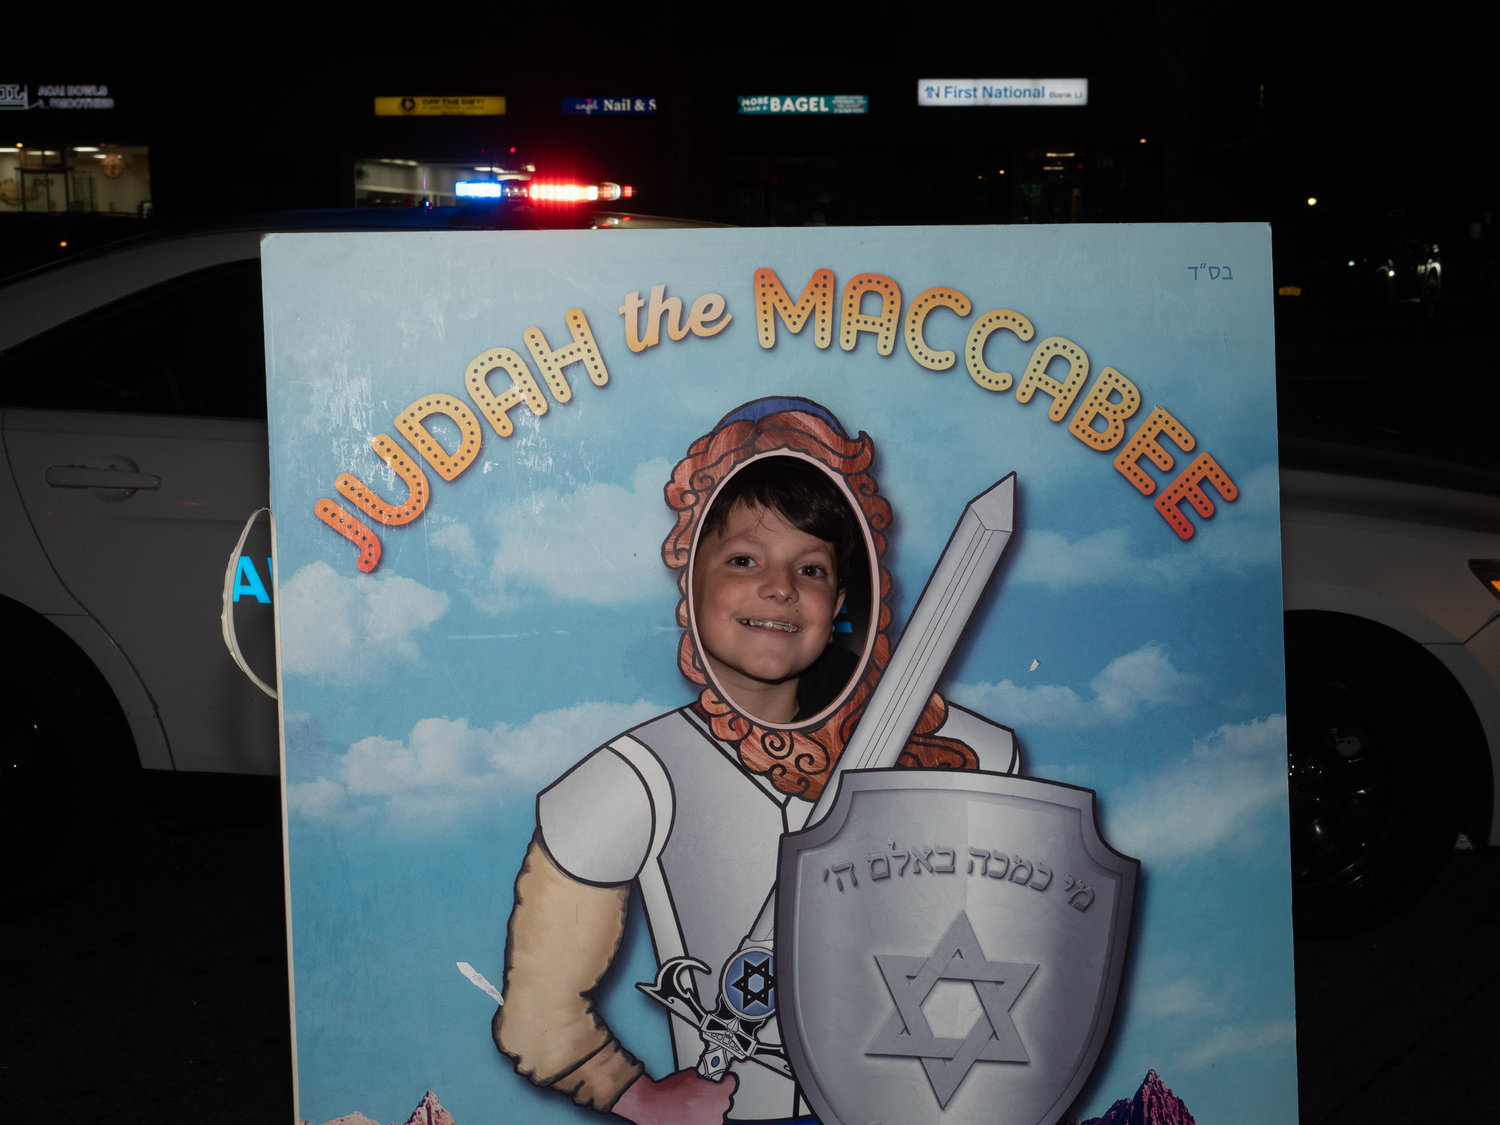 Alex Thayer, 9, got to imagine himself as Judah Maccabee, one of the heroes of what became known as Hanukkah.